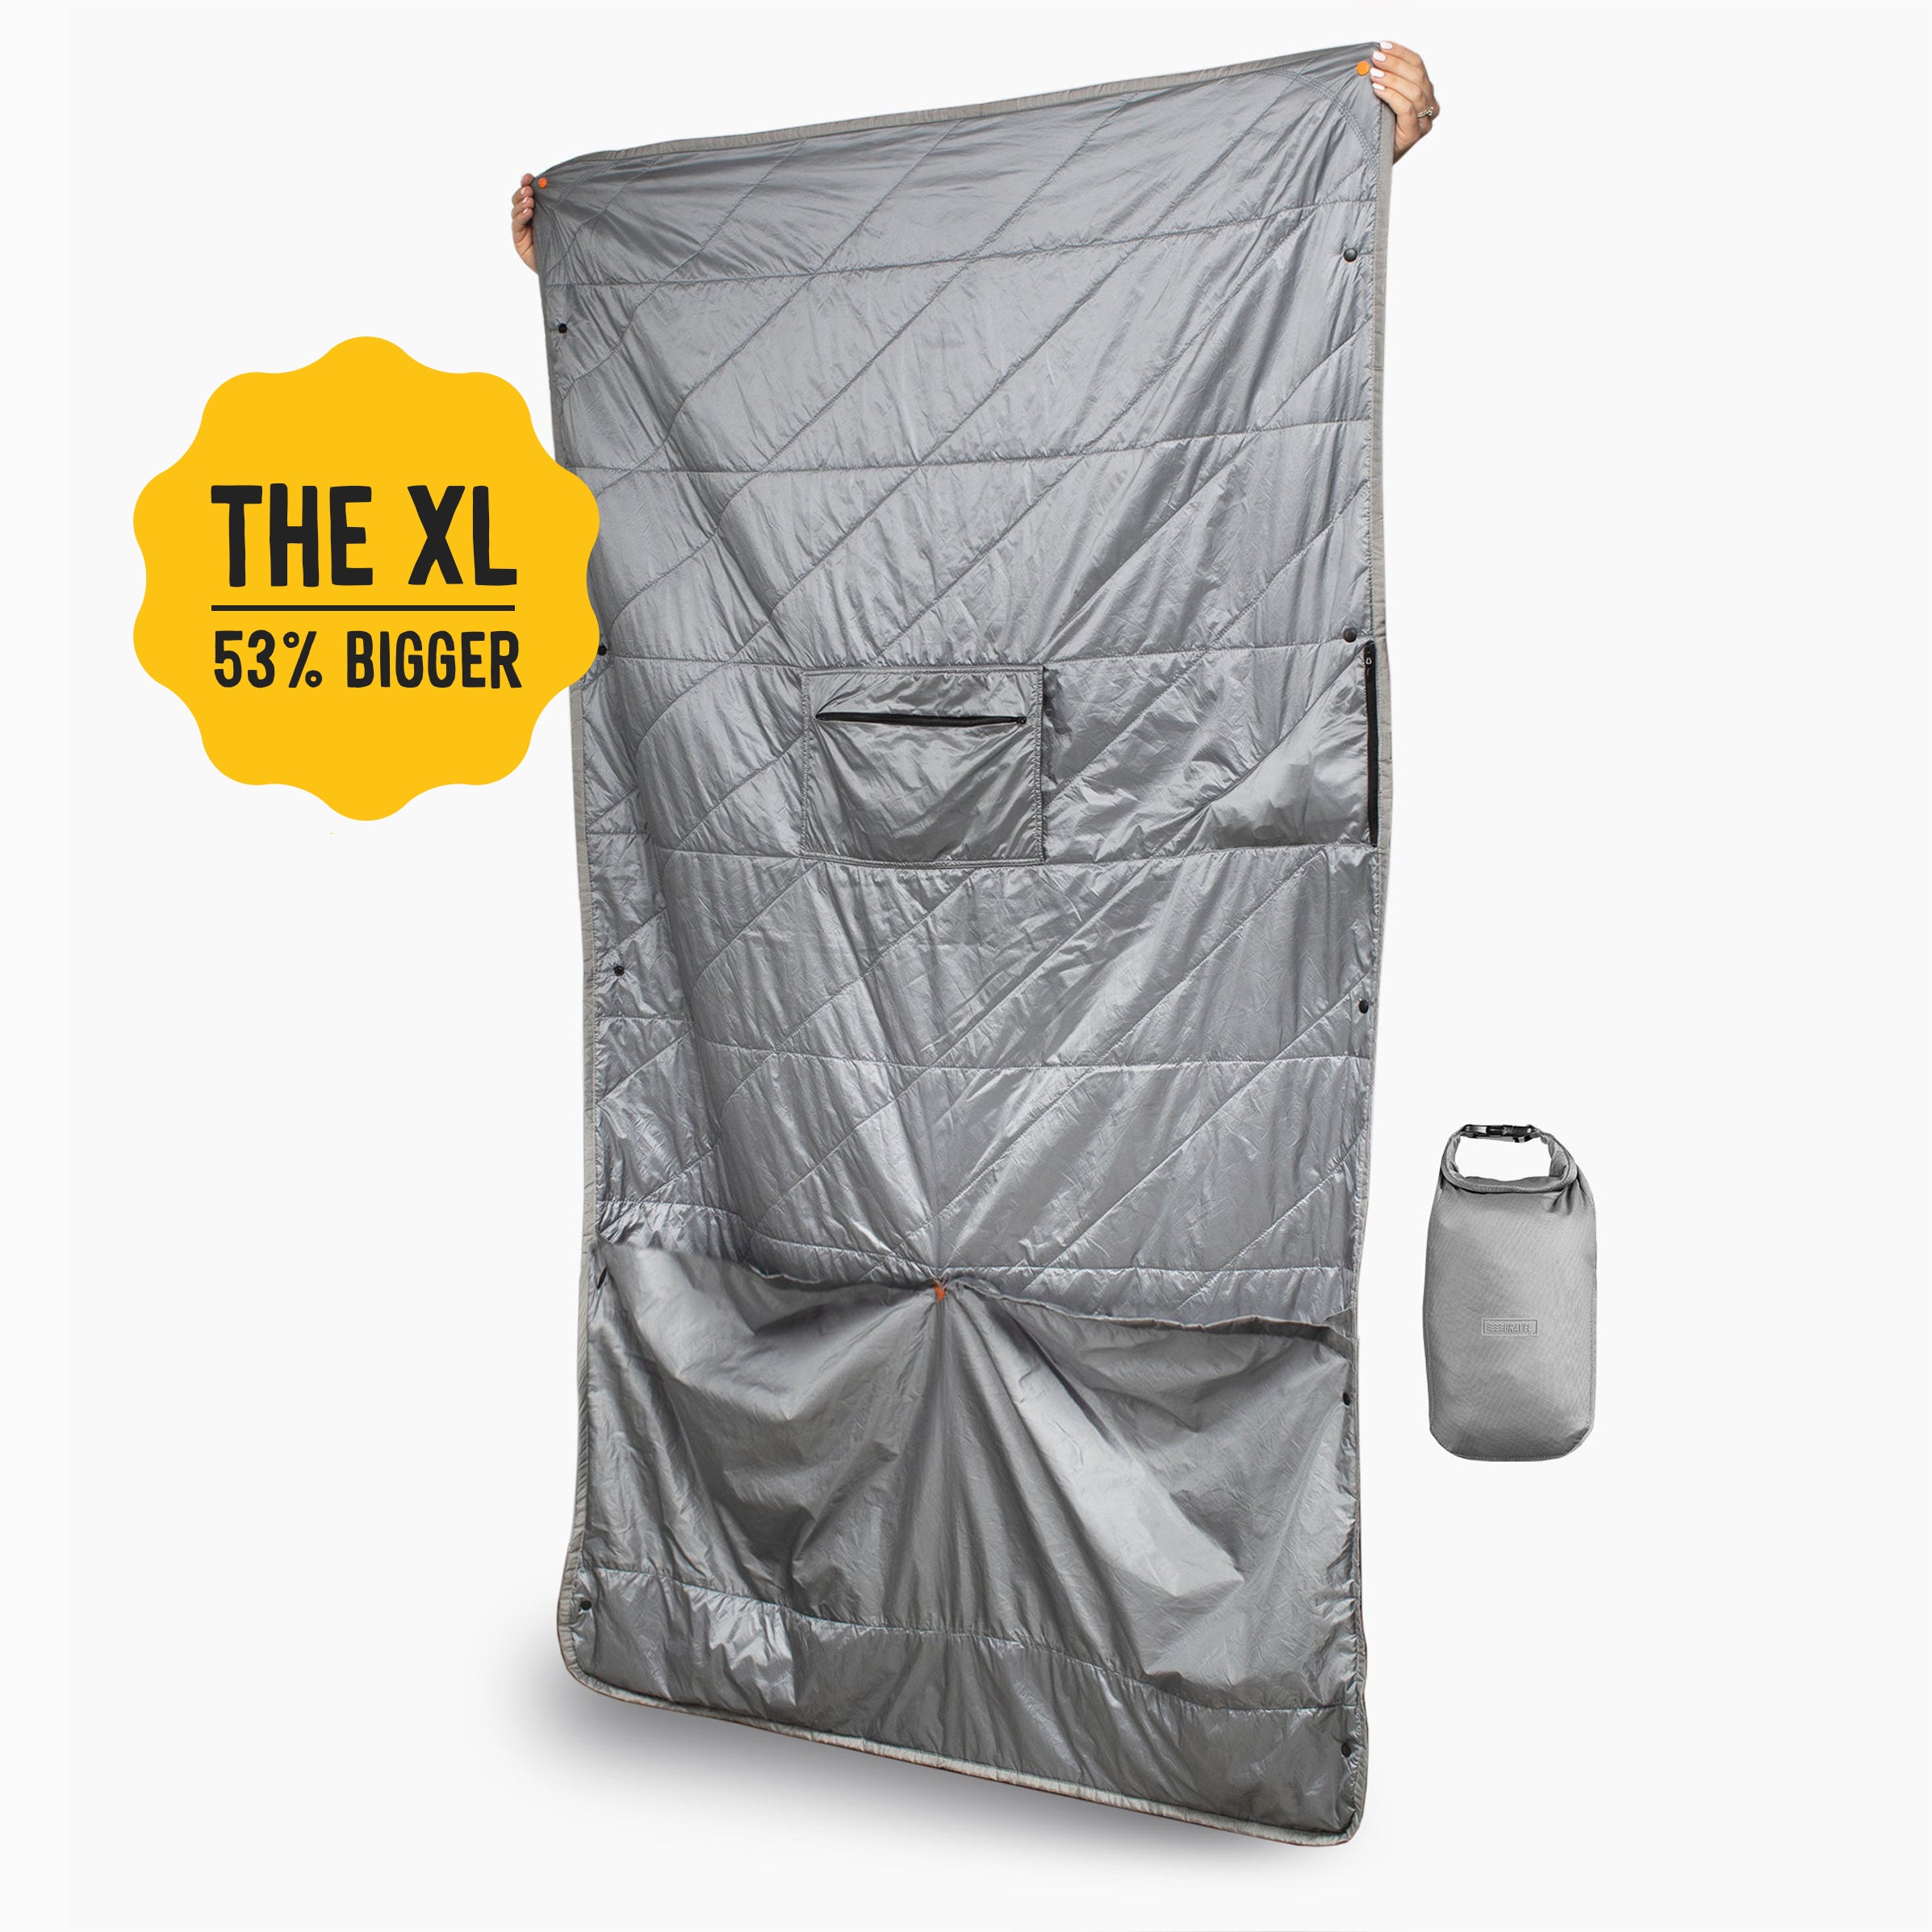 Layover™ XL Travel Blanket - Insulated & Packable | Gray